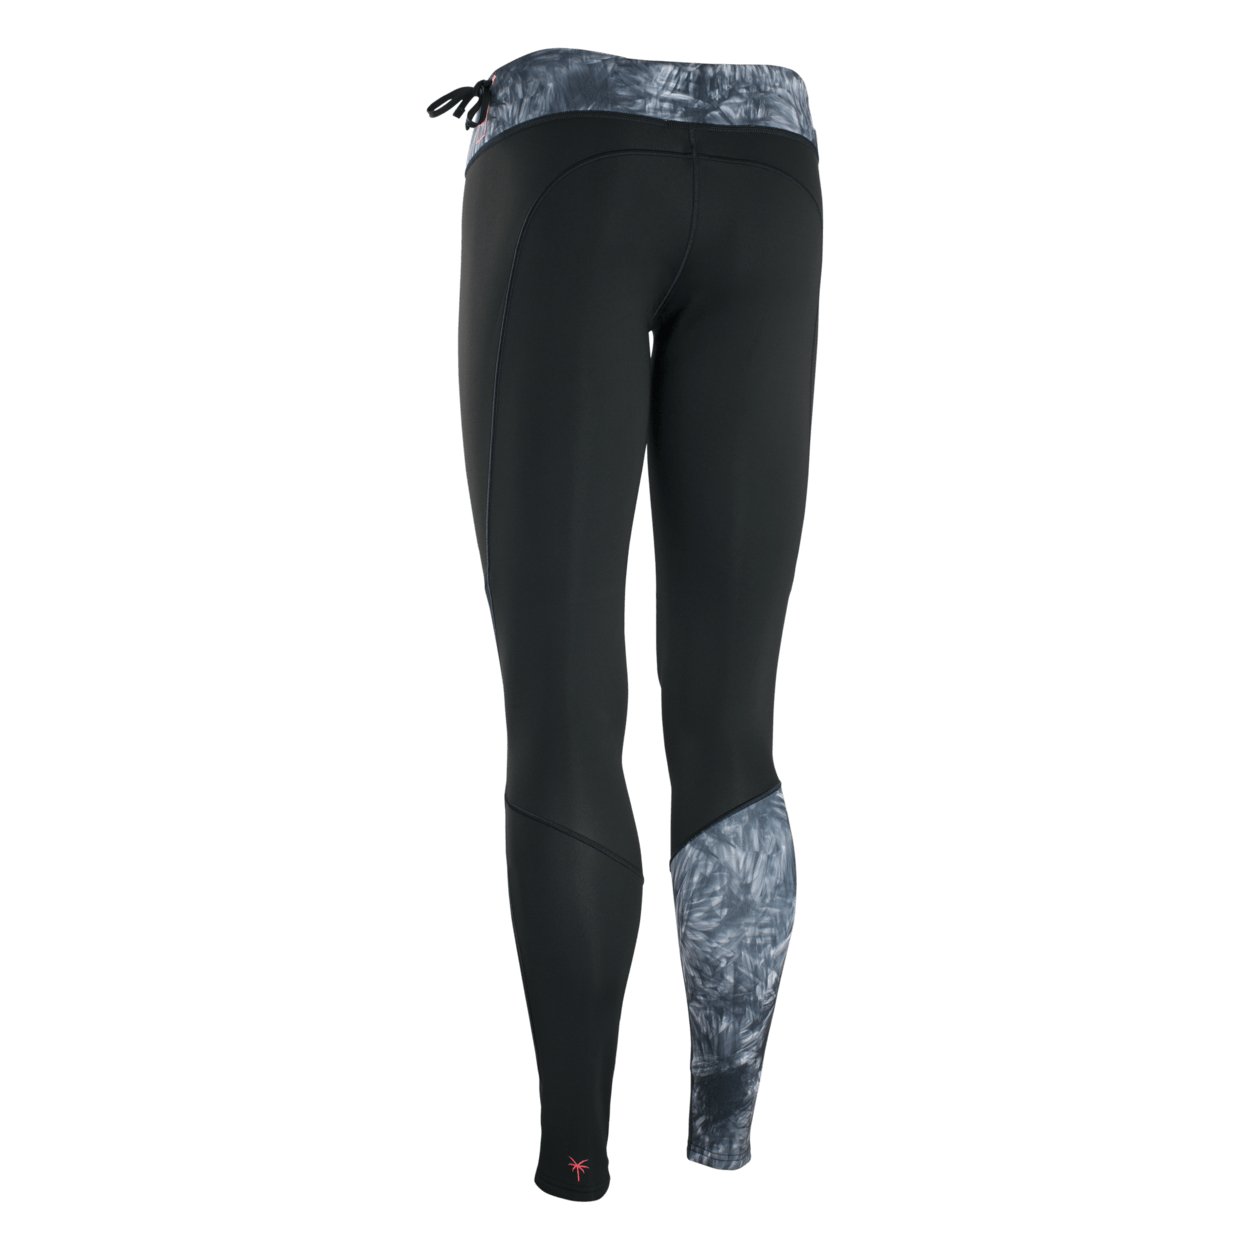 ION Amaze Long Pants 1.5 2023 - Worthing Watersports - 9010583091433 - Wetsuits - ION Water